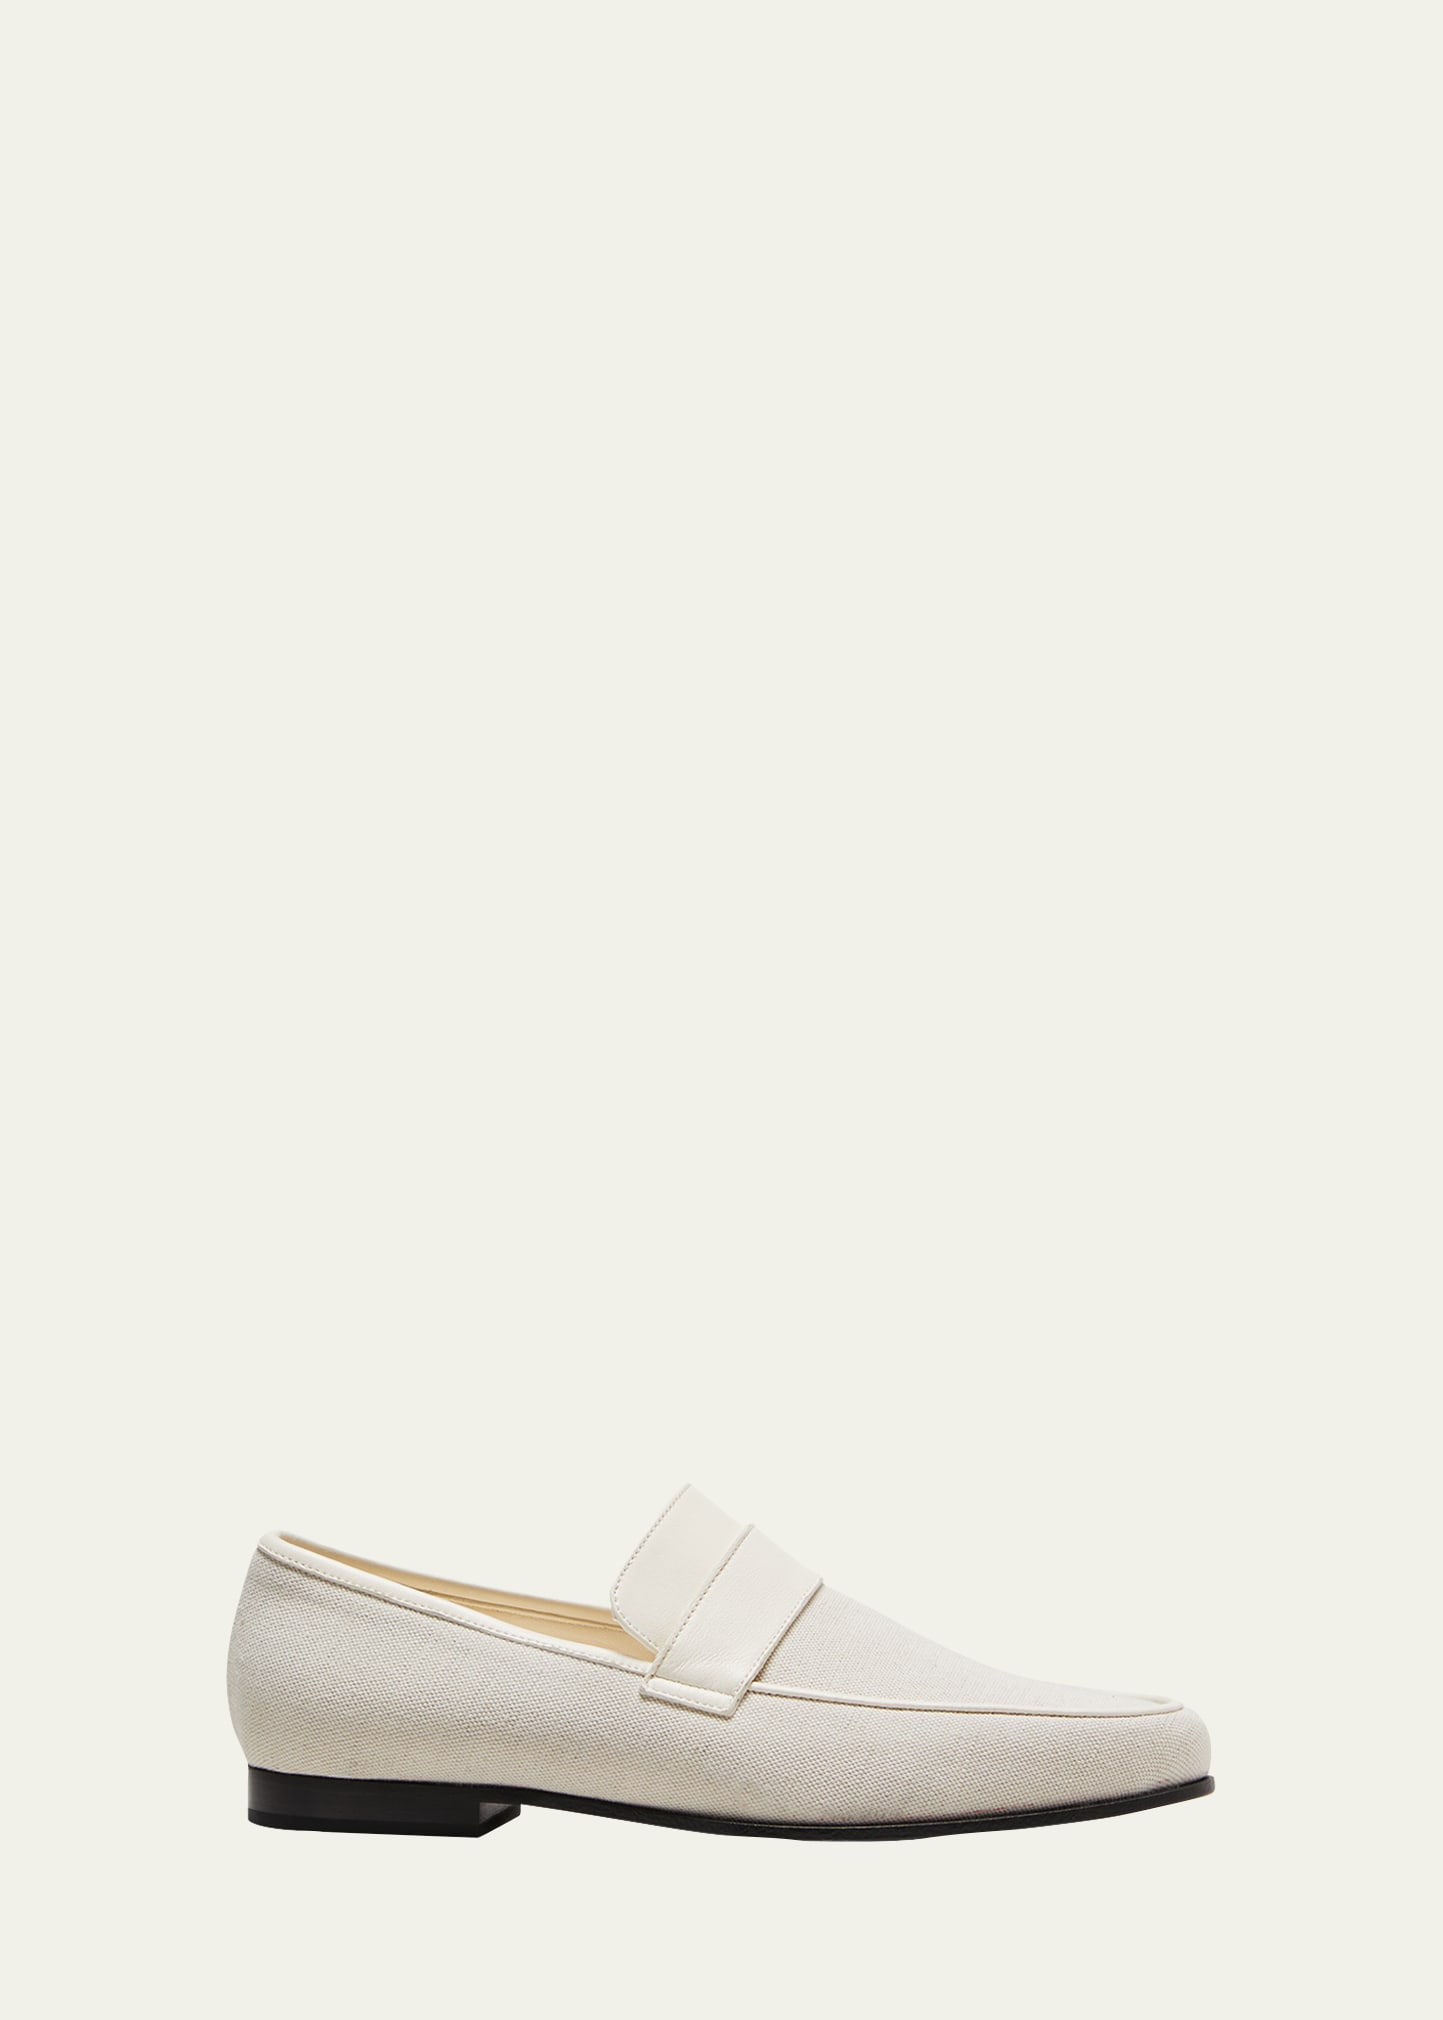 The Canvas Penny Loafers